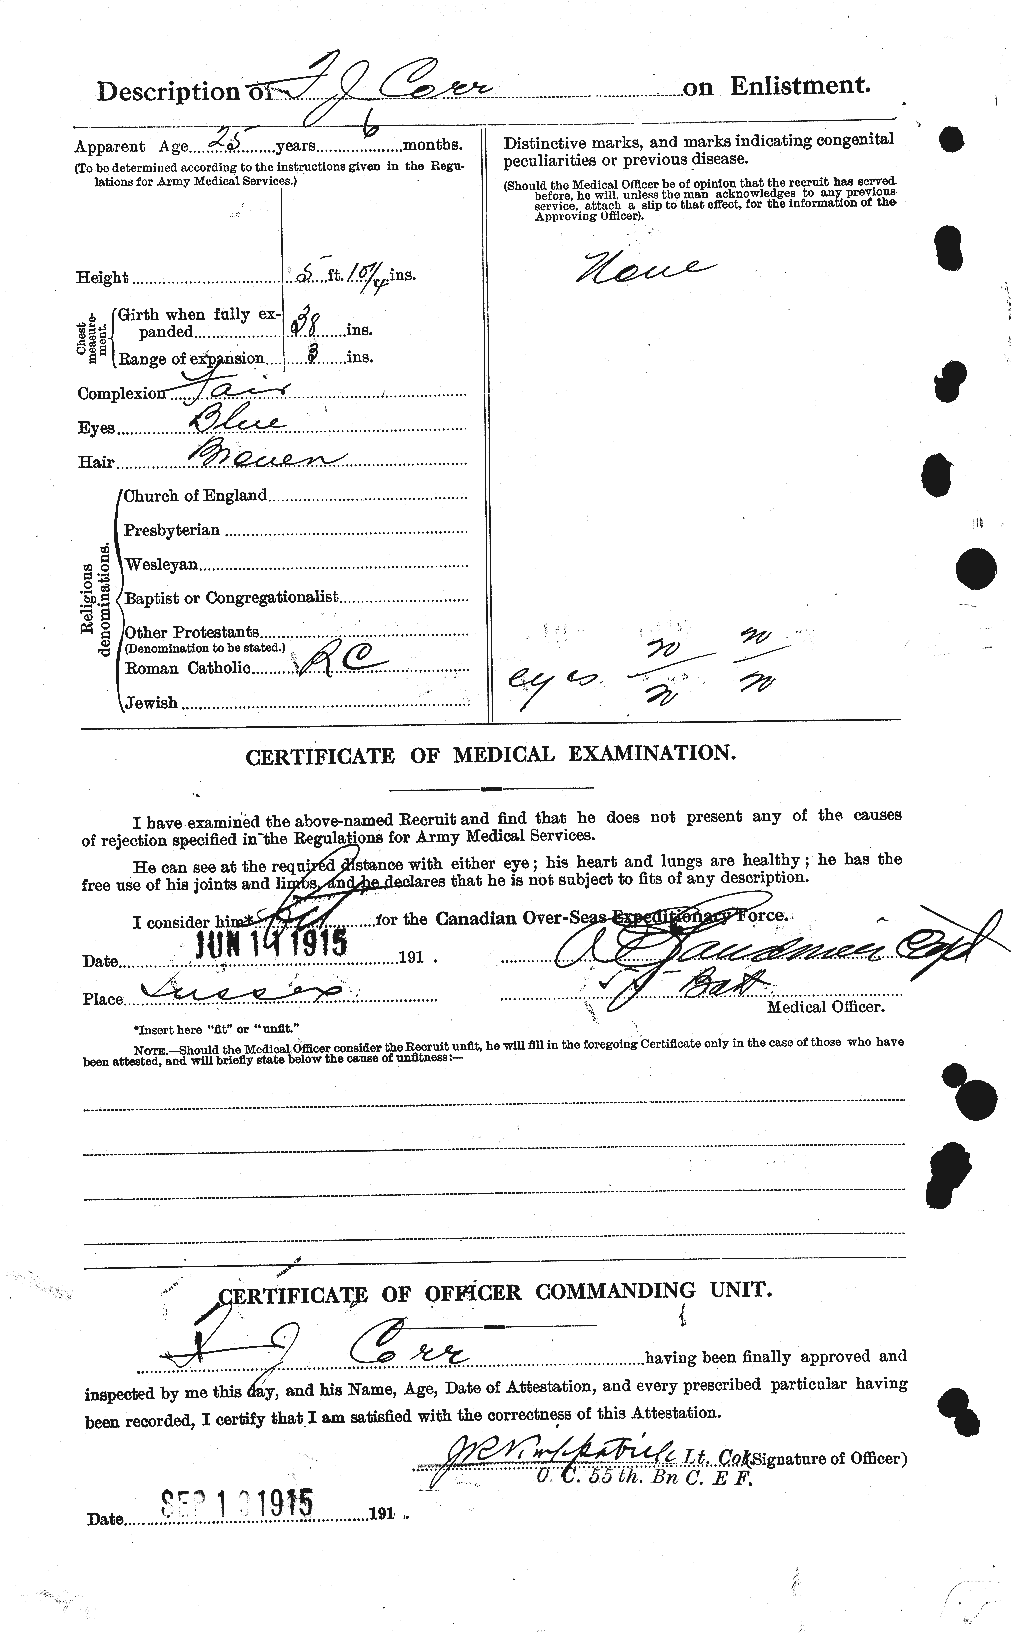 Personnel Records of the First World War - CEF 055010b